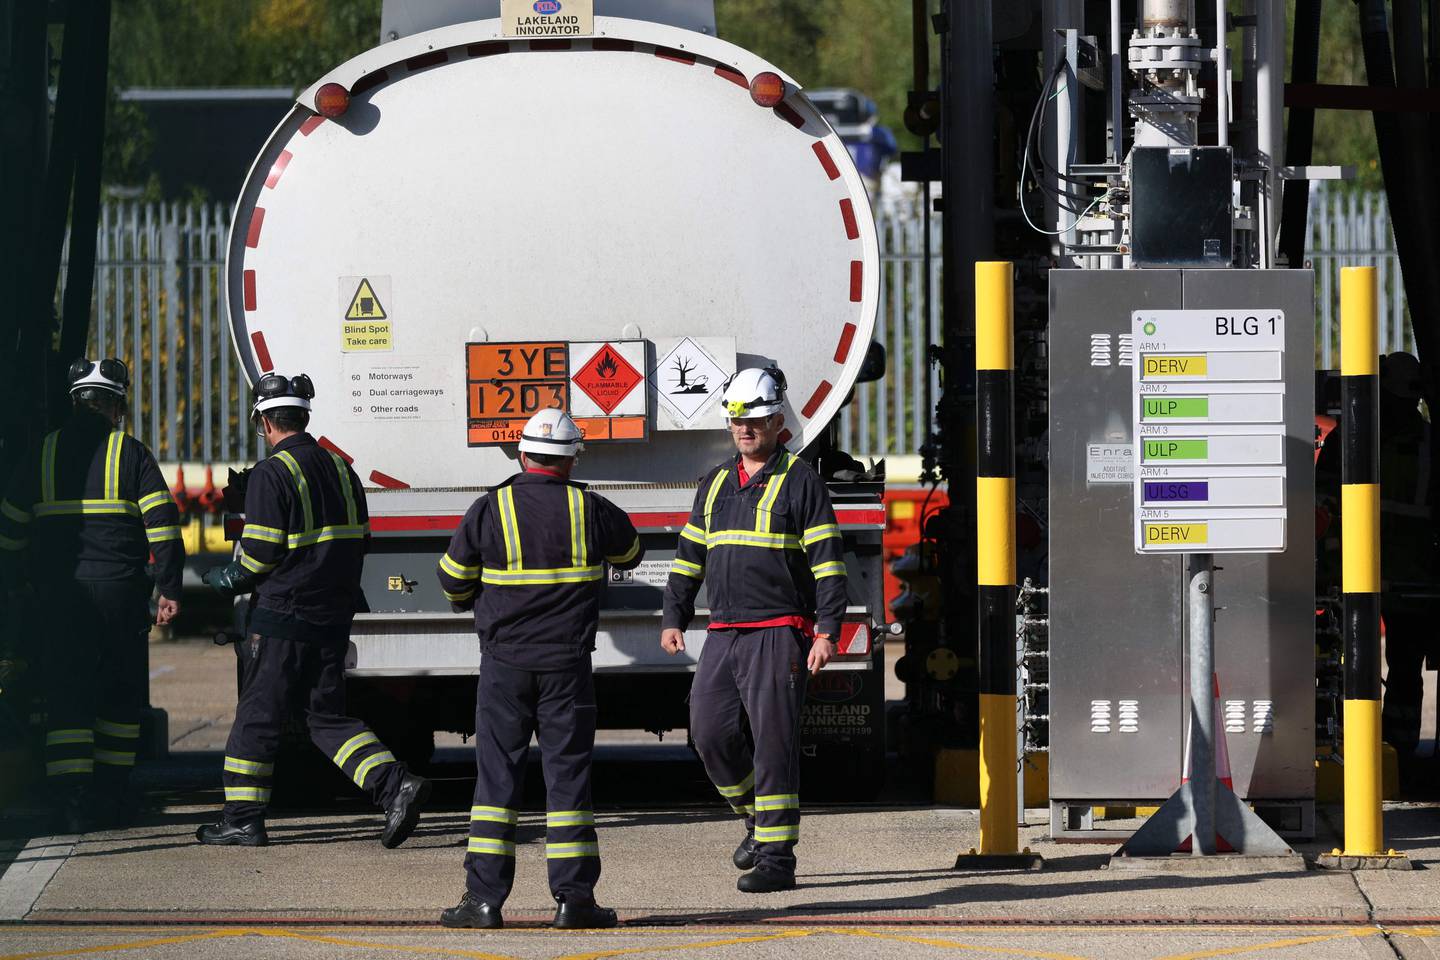 Technicians fill a tanker with petrol at an oil depot north of London. A shortage of HGV drivers pushed petrol firms into rationing deliveries. AFP